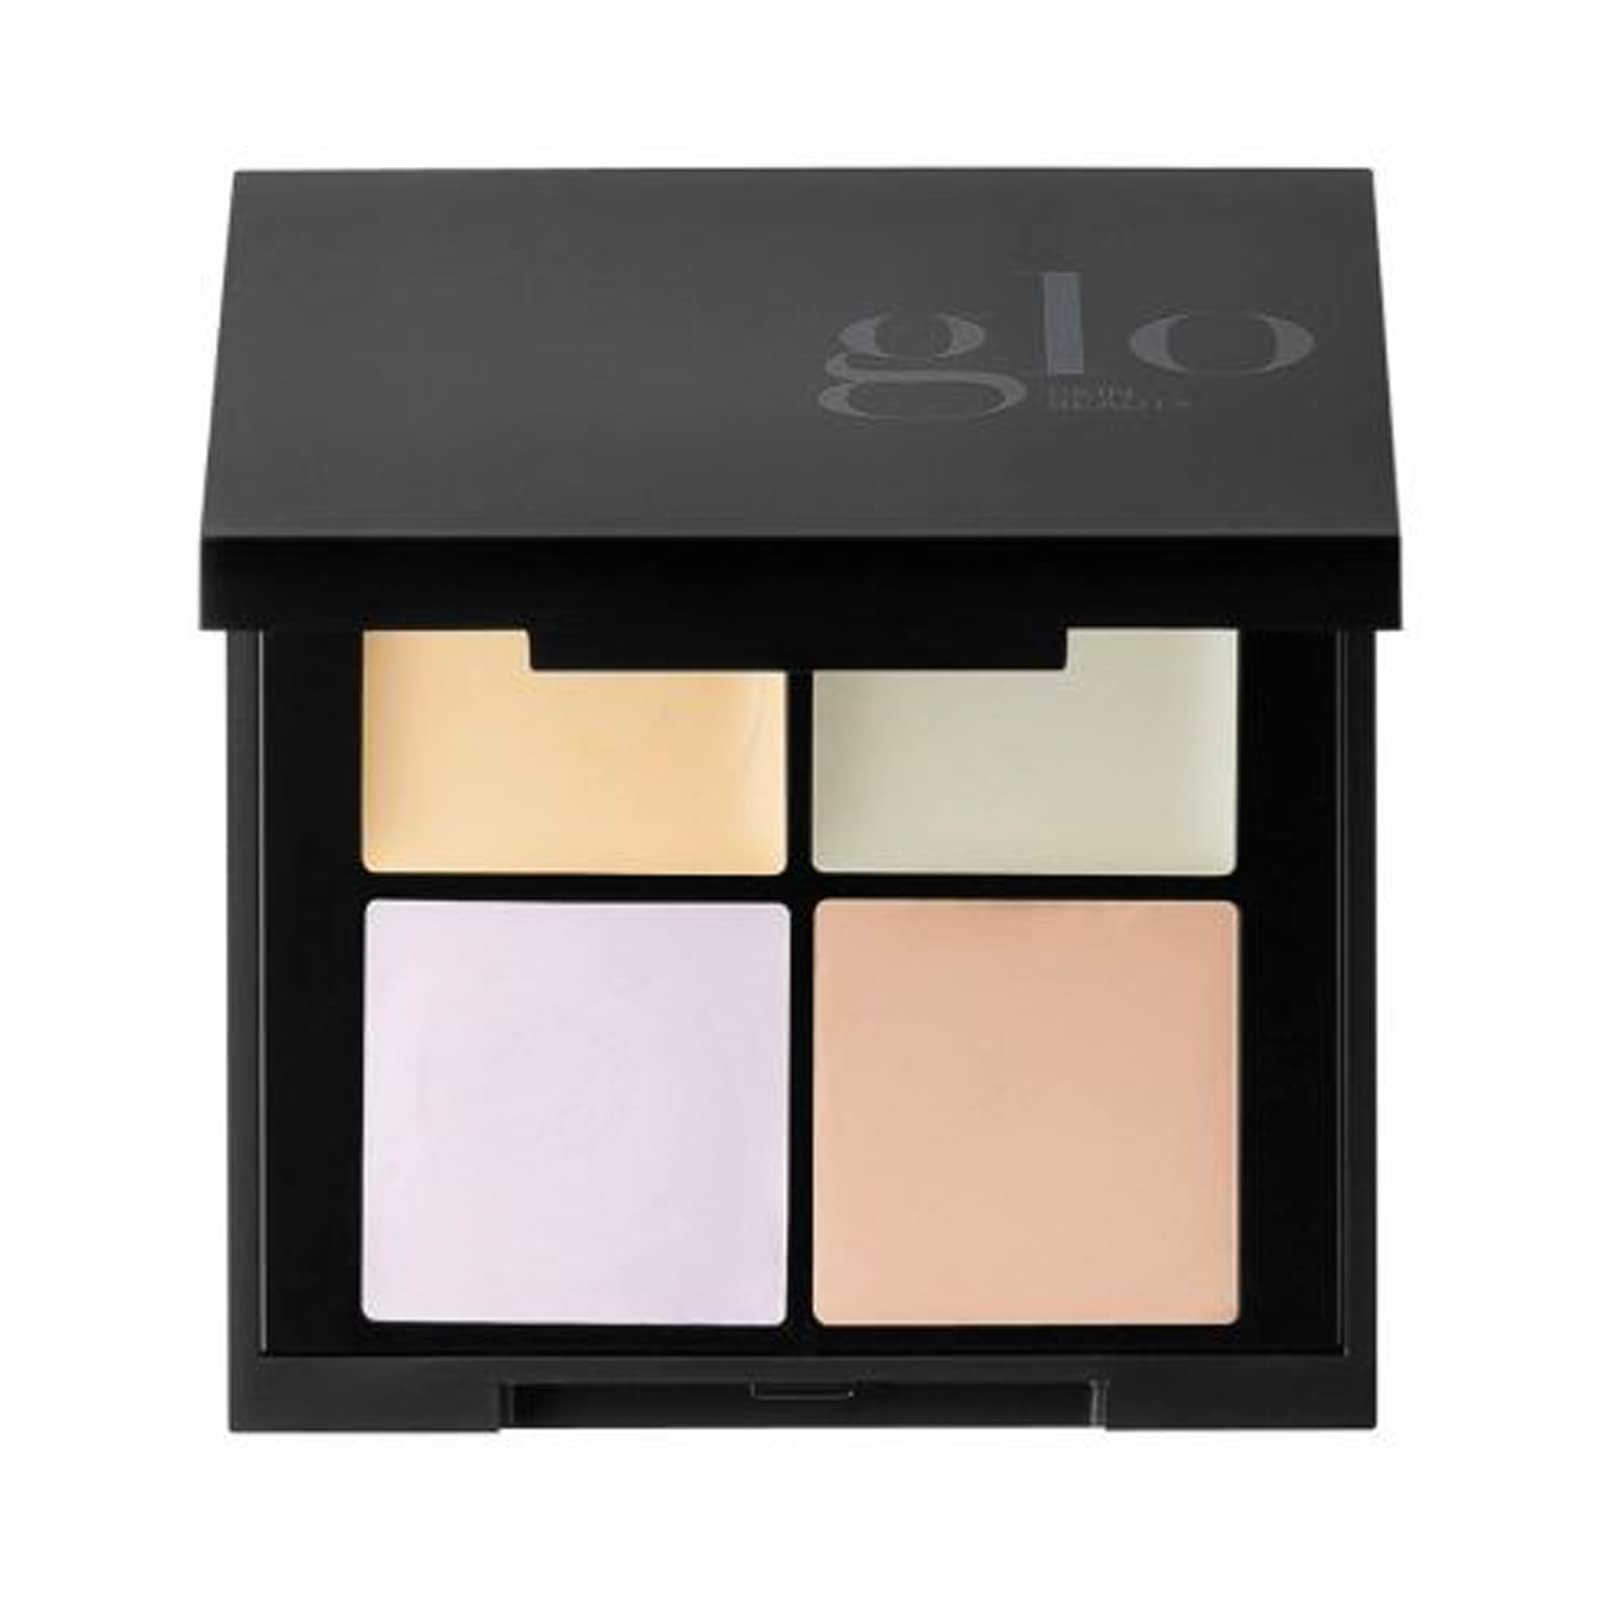 Glo Skin Beauty Corrective Camouflage Kit | Sheer, Easy-To-Apply Formulation Expertly Neutralizes and Conceals Skin Discolorations